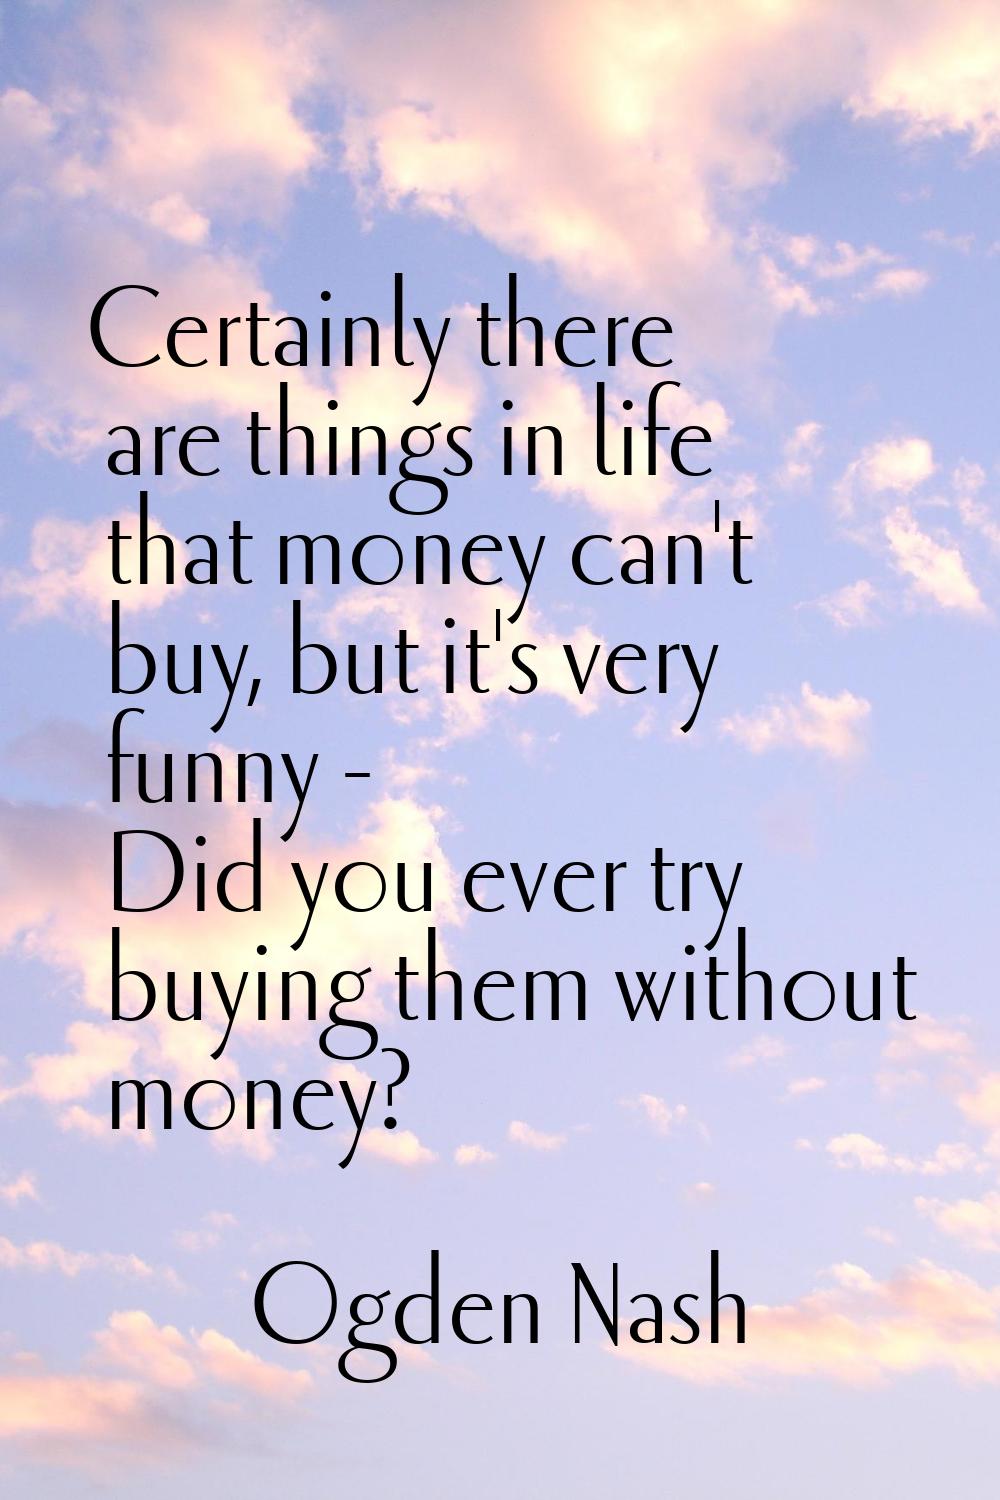 Certainly there are things in life that money can't buy, but it's very funny - Did you ever try buy